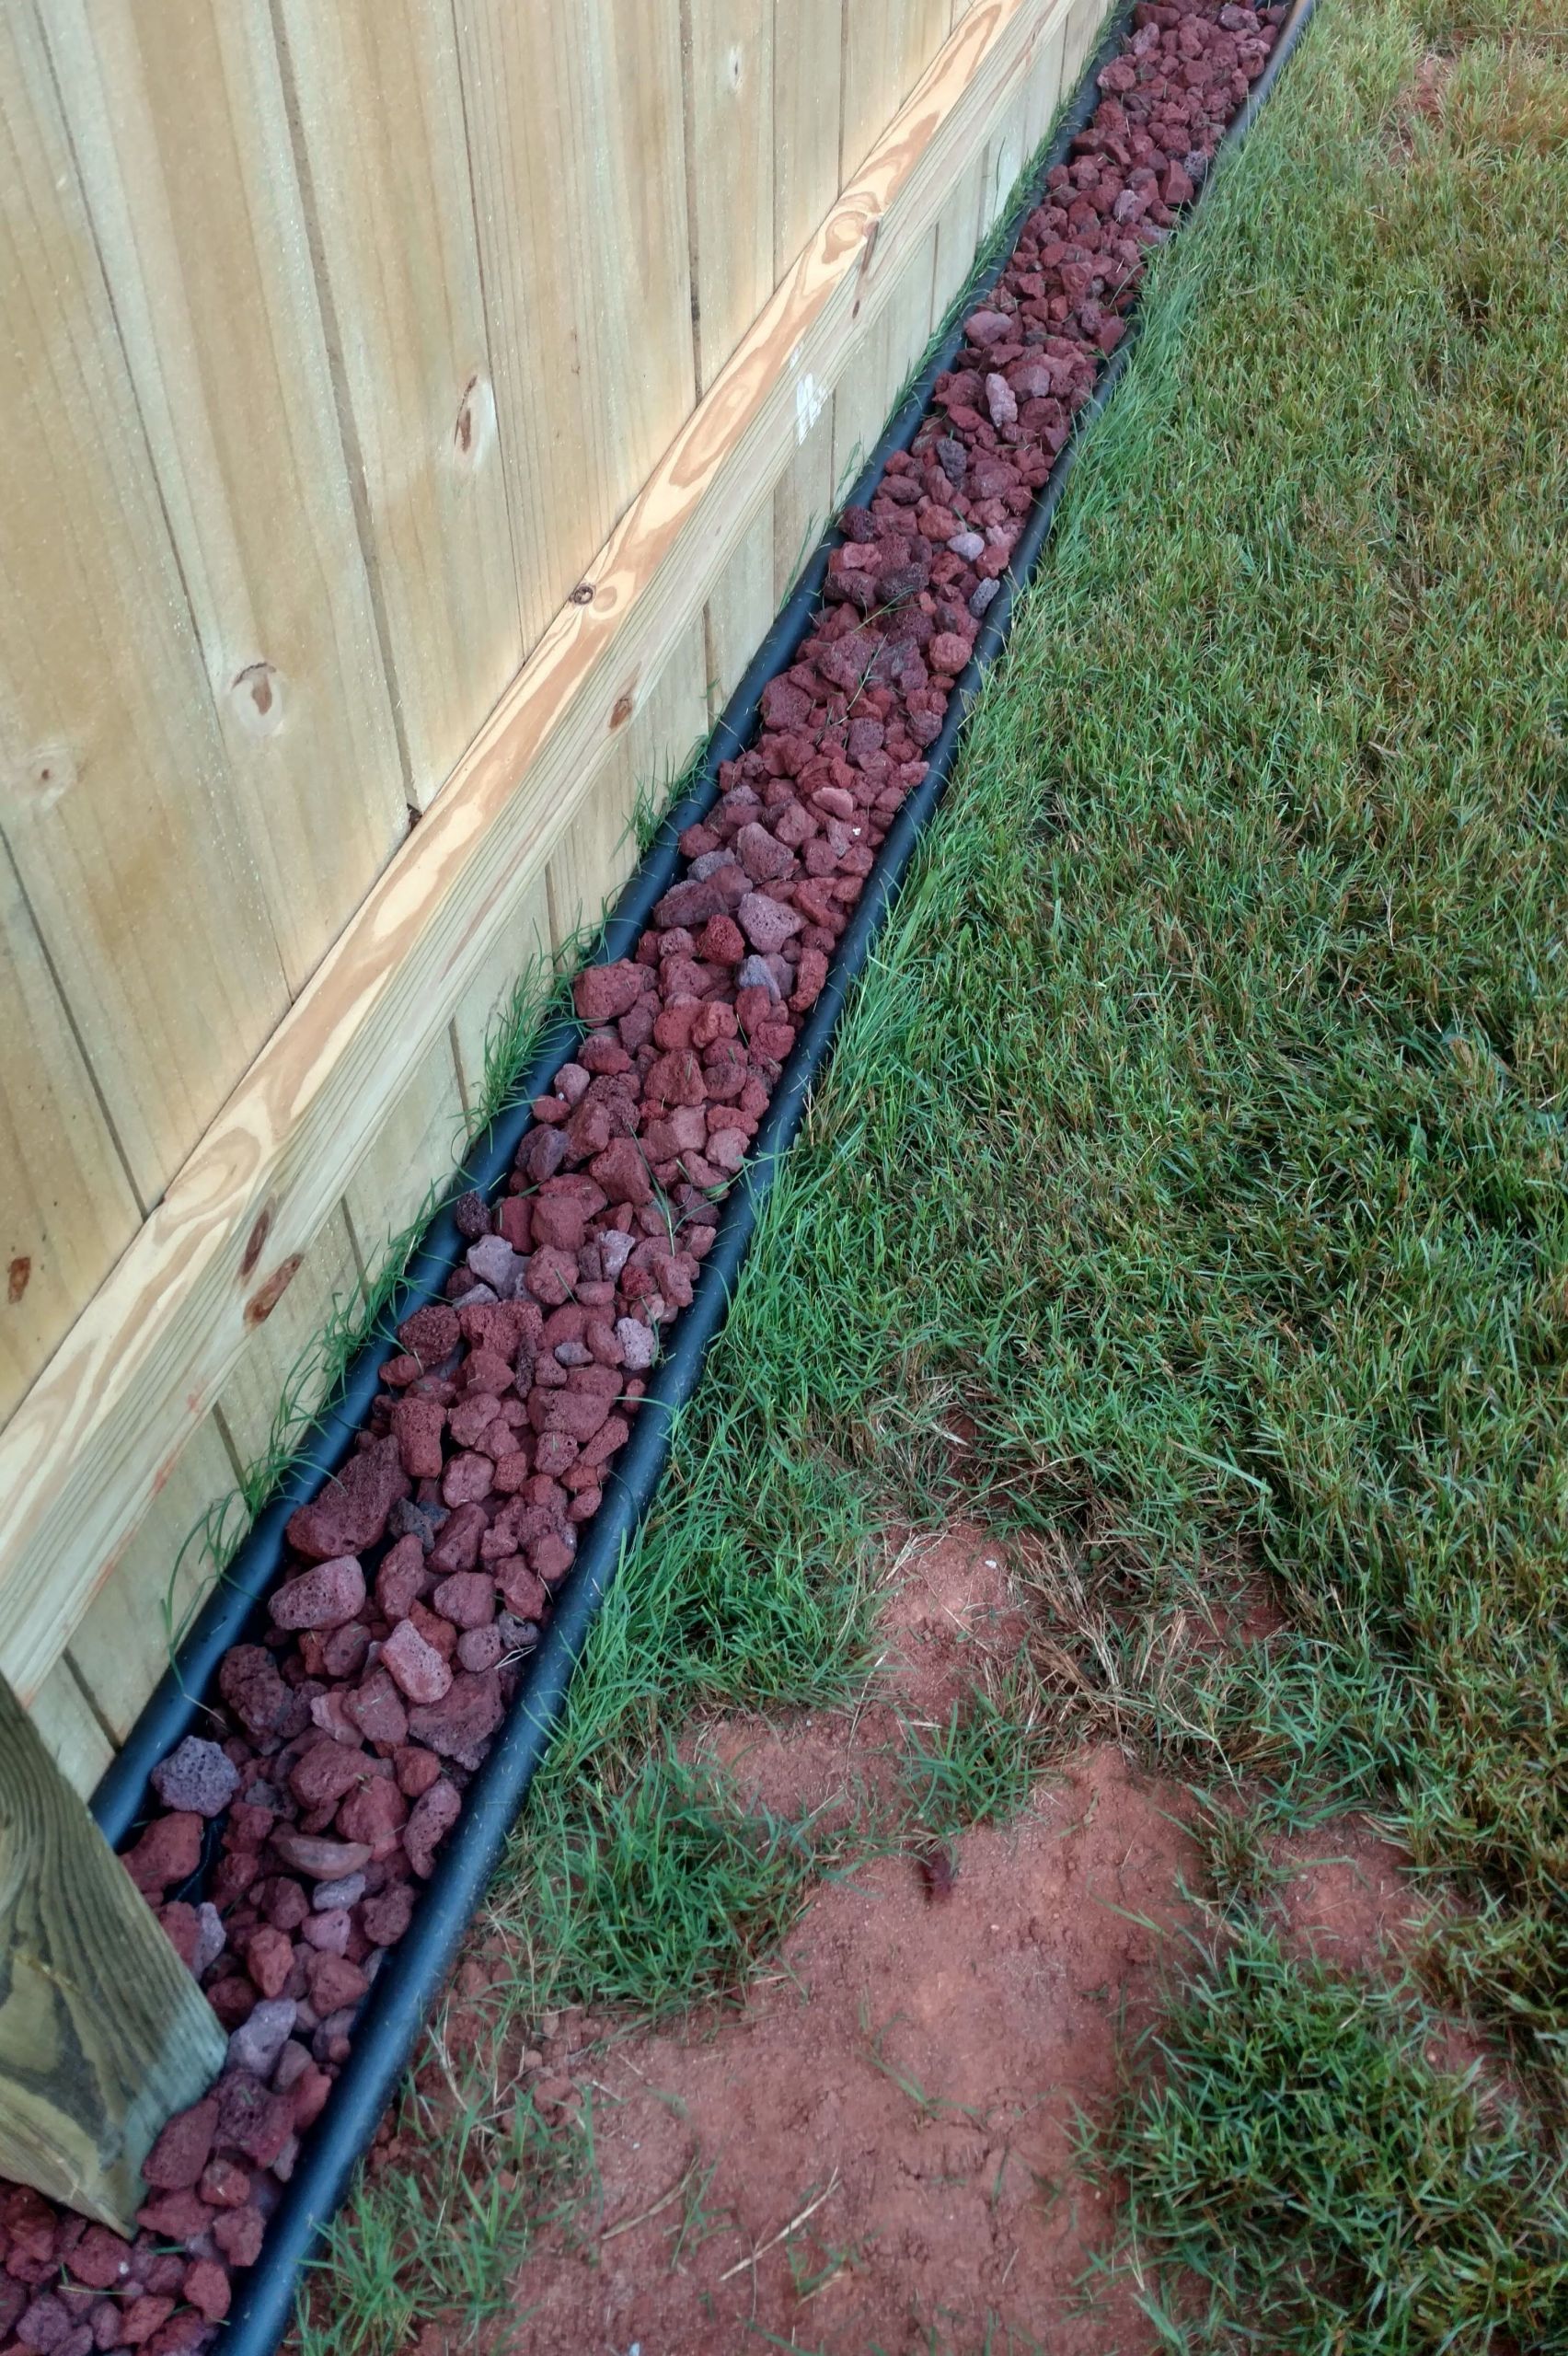 Black Landscape Edging
 Ideas Presenting Lowes Garden Edging For Beautify And